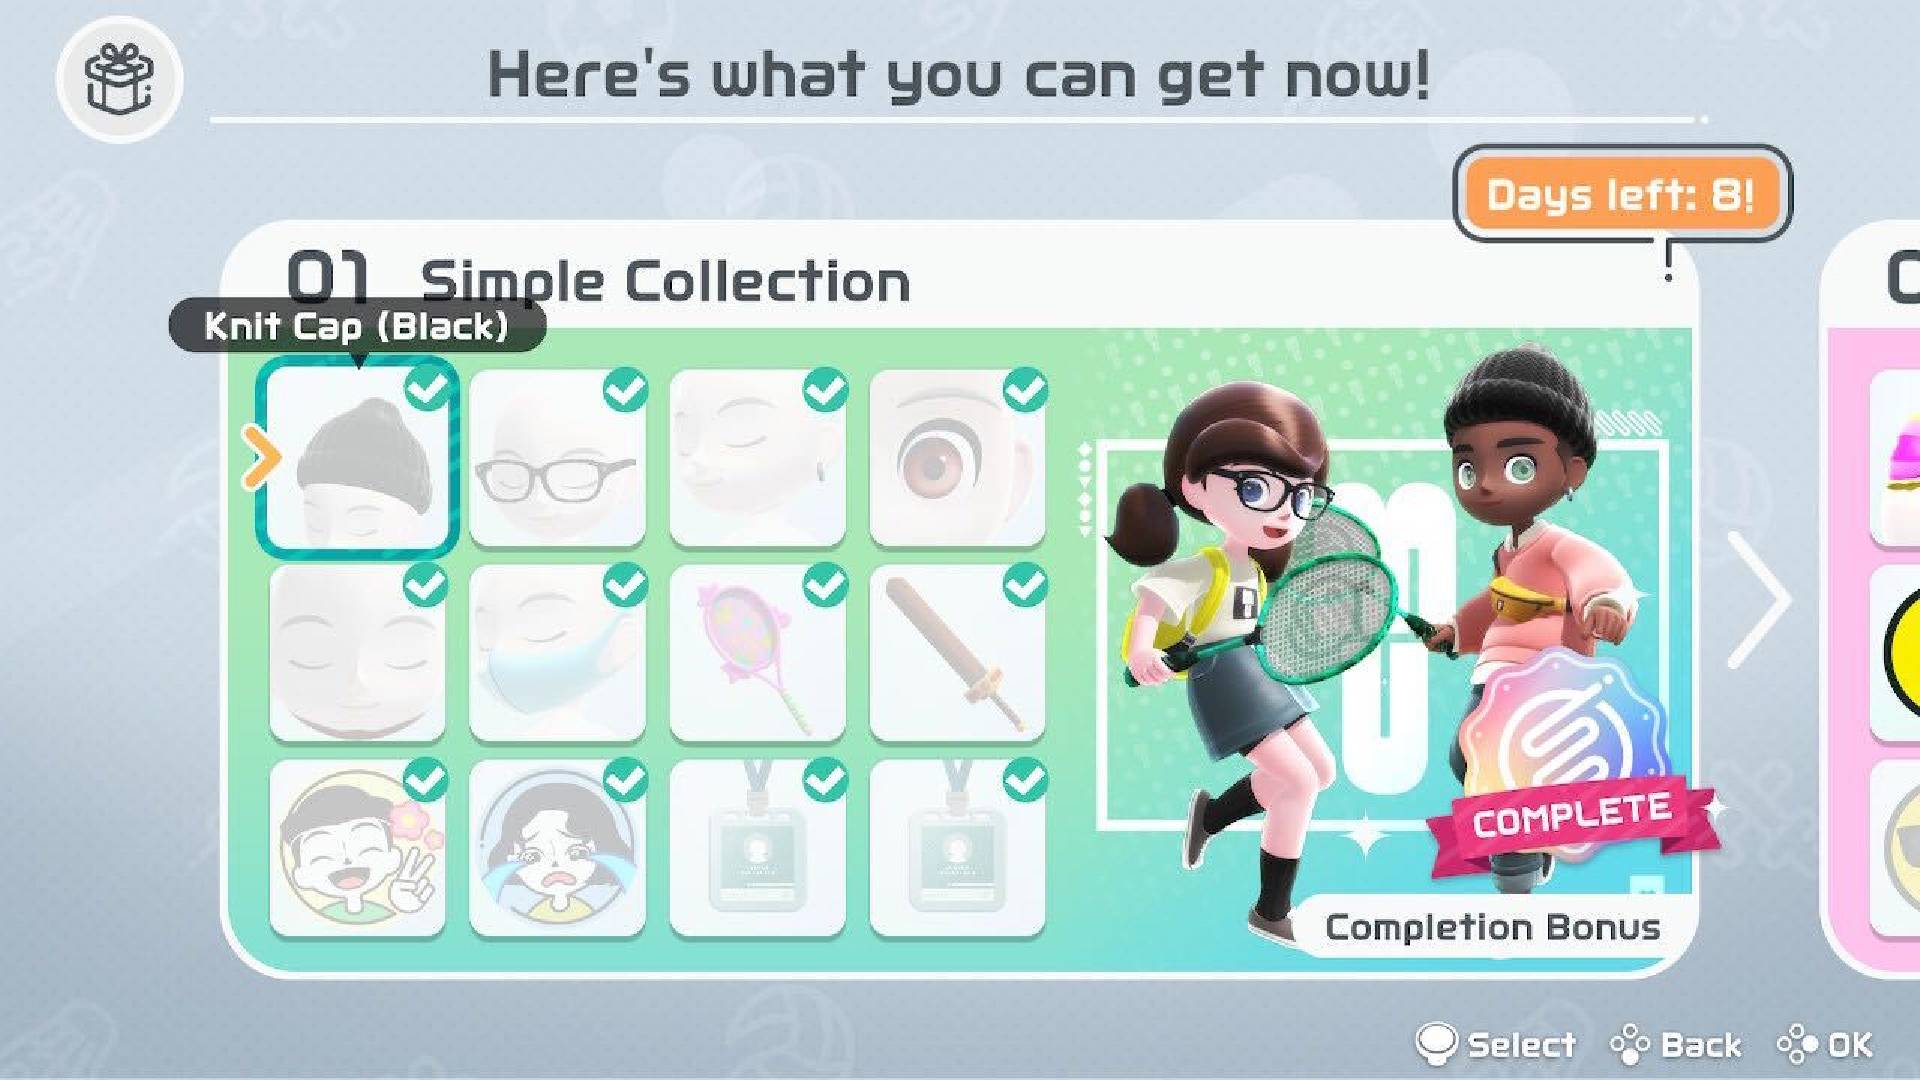 Nintendo Switch Sports cosmetics: A board is shown full of unlockable fashion items for Nintendo Switch Sports 